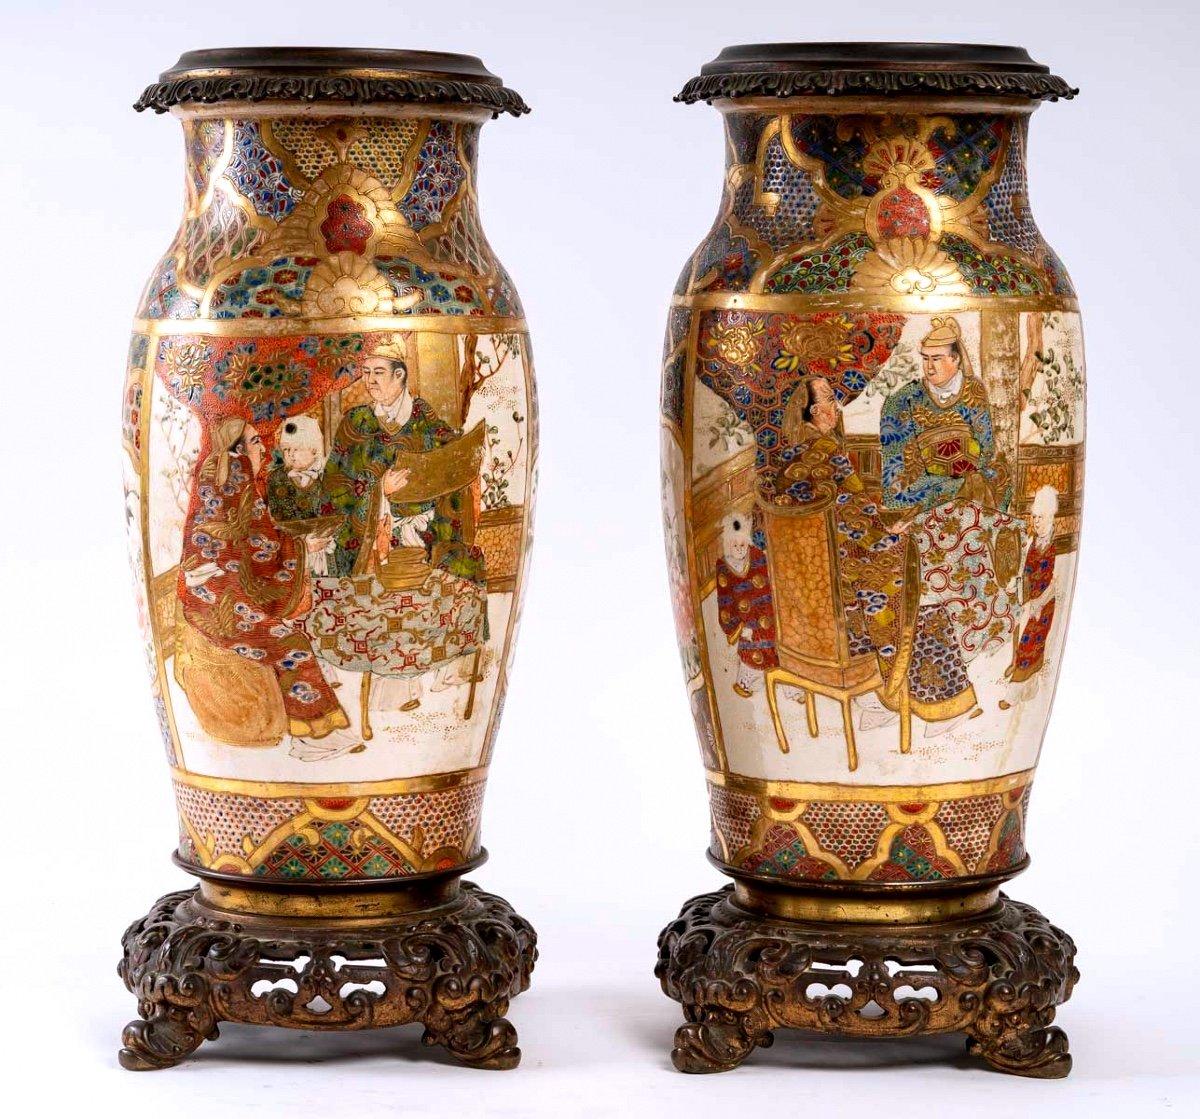 Elegant pair of ovoid ceramic vases mounted on French bronze, decorated with polychrome enamels in relief and pure gold on a white background.
The body is decorated with large cartouches representing high dignitaries in interiors. 

The scenes